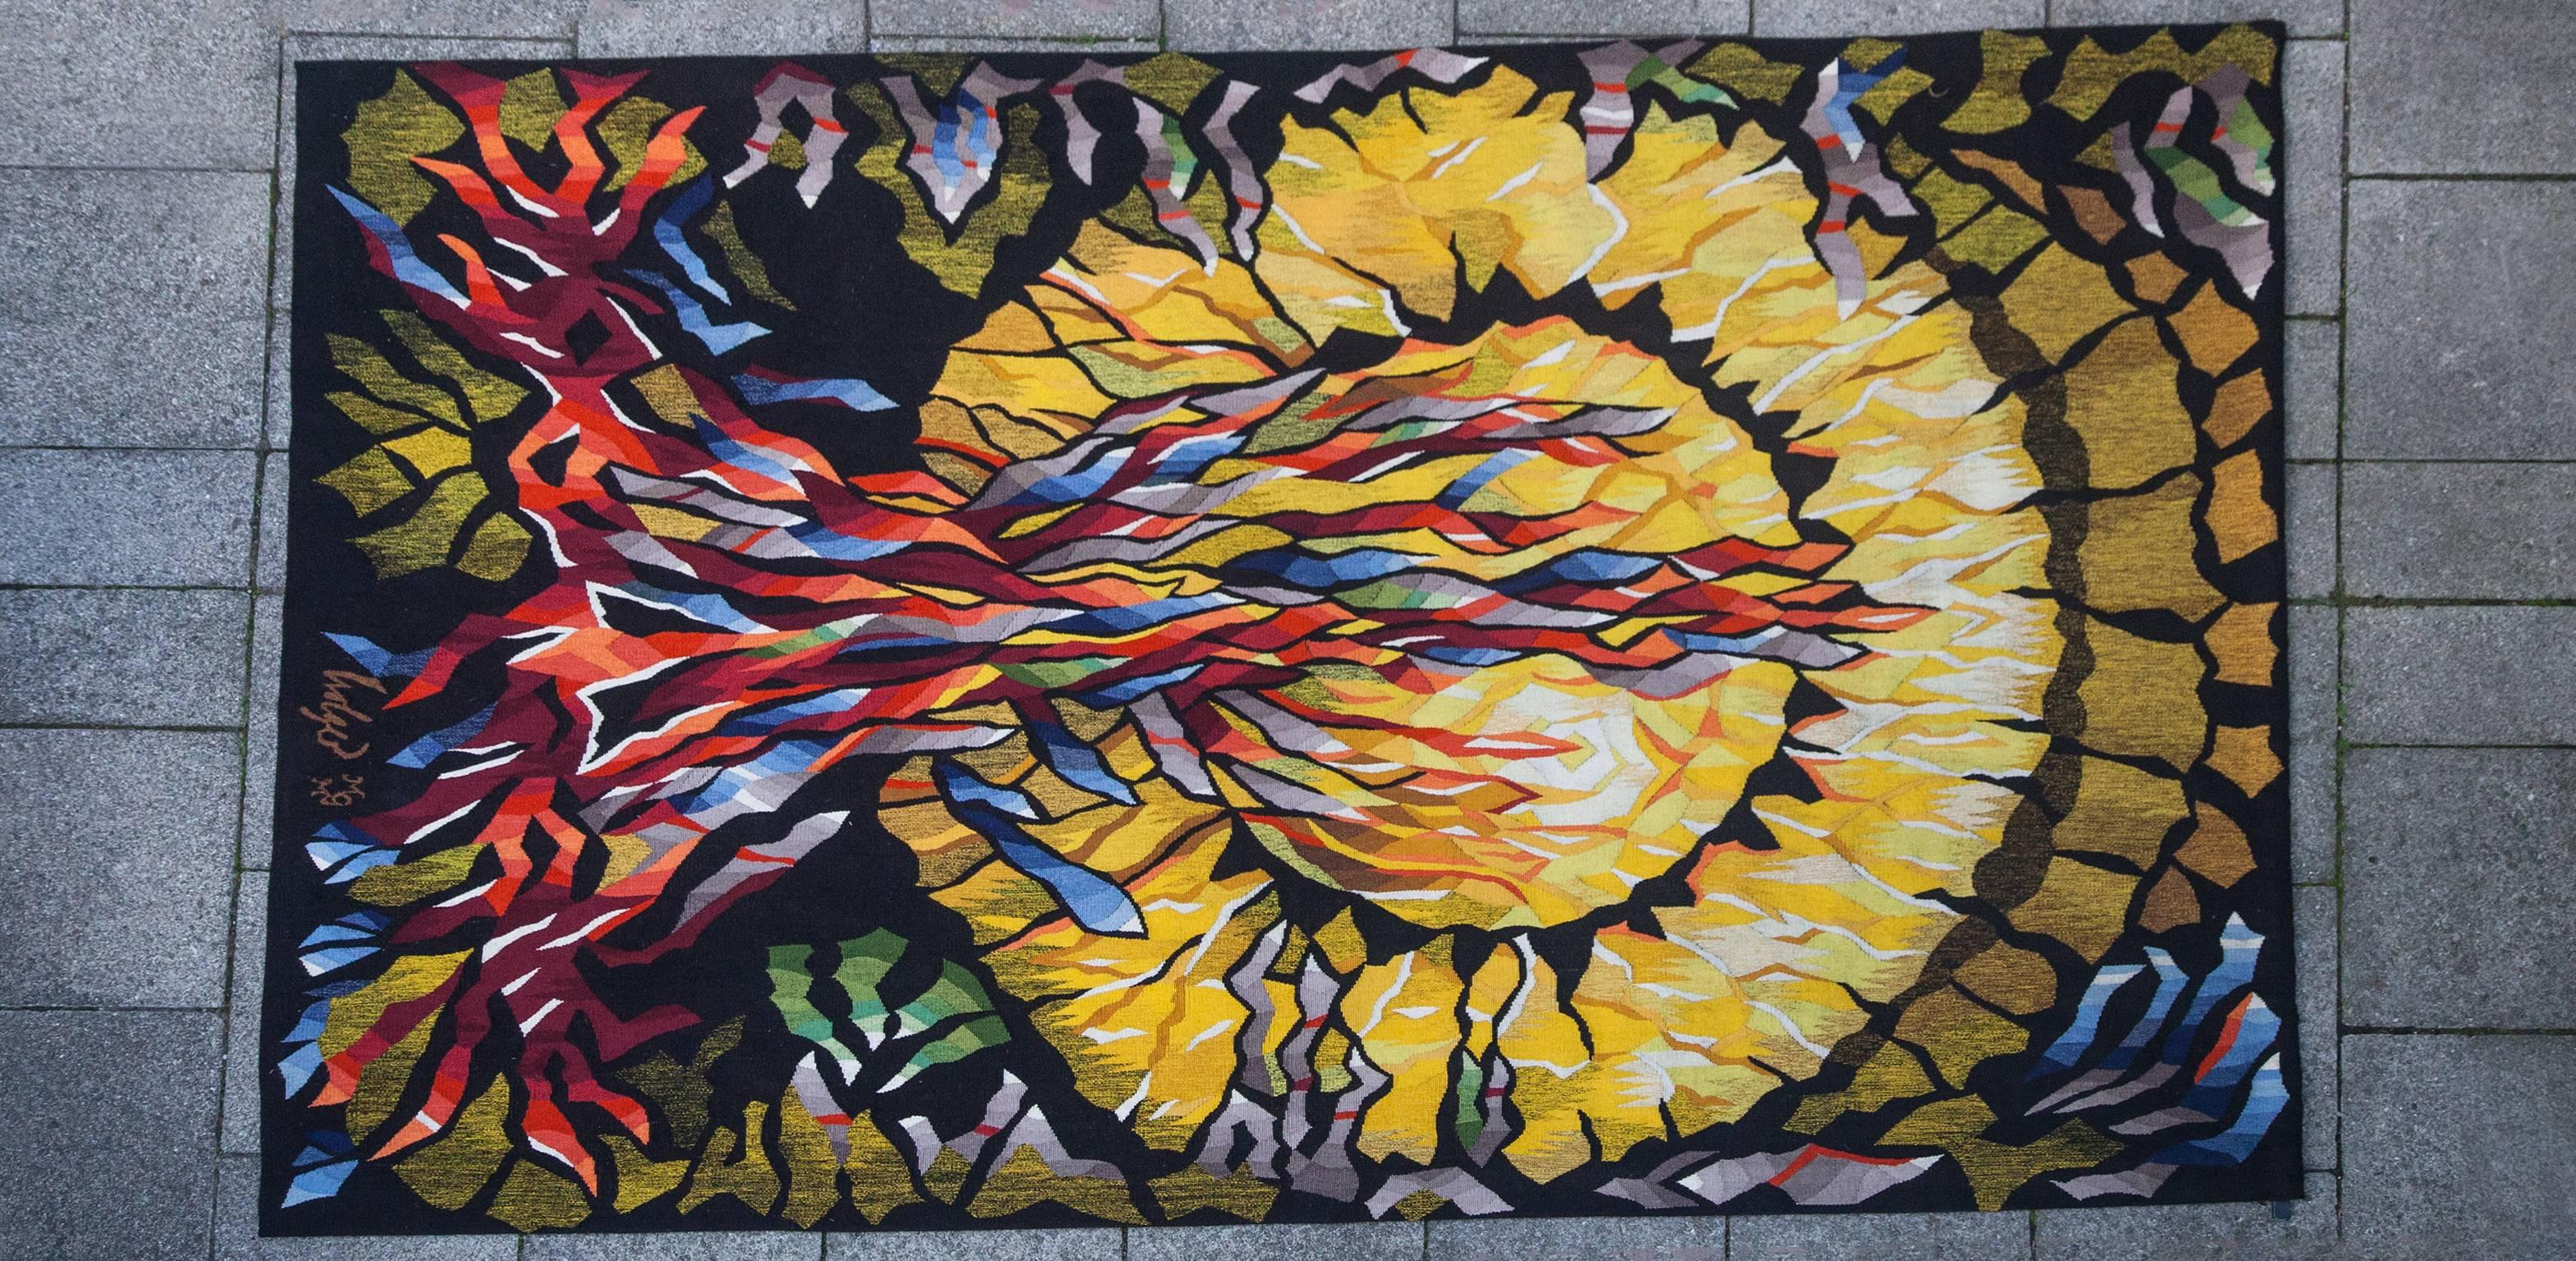 Wall carpet Feuersonne on black ground designed by Dirk Holger (born in 1939). Manufacture Munich Tapestry Manufactory, circa 1970. 
Measures: 240 x 149 cm.